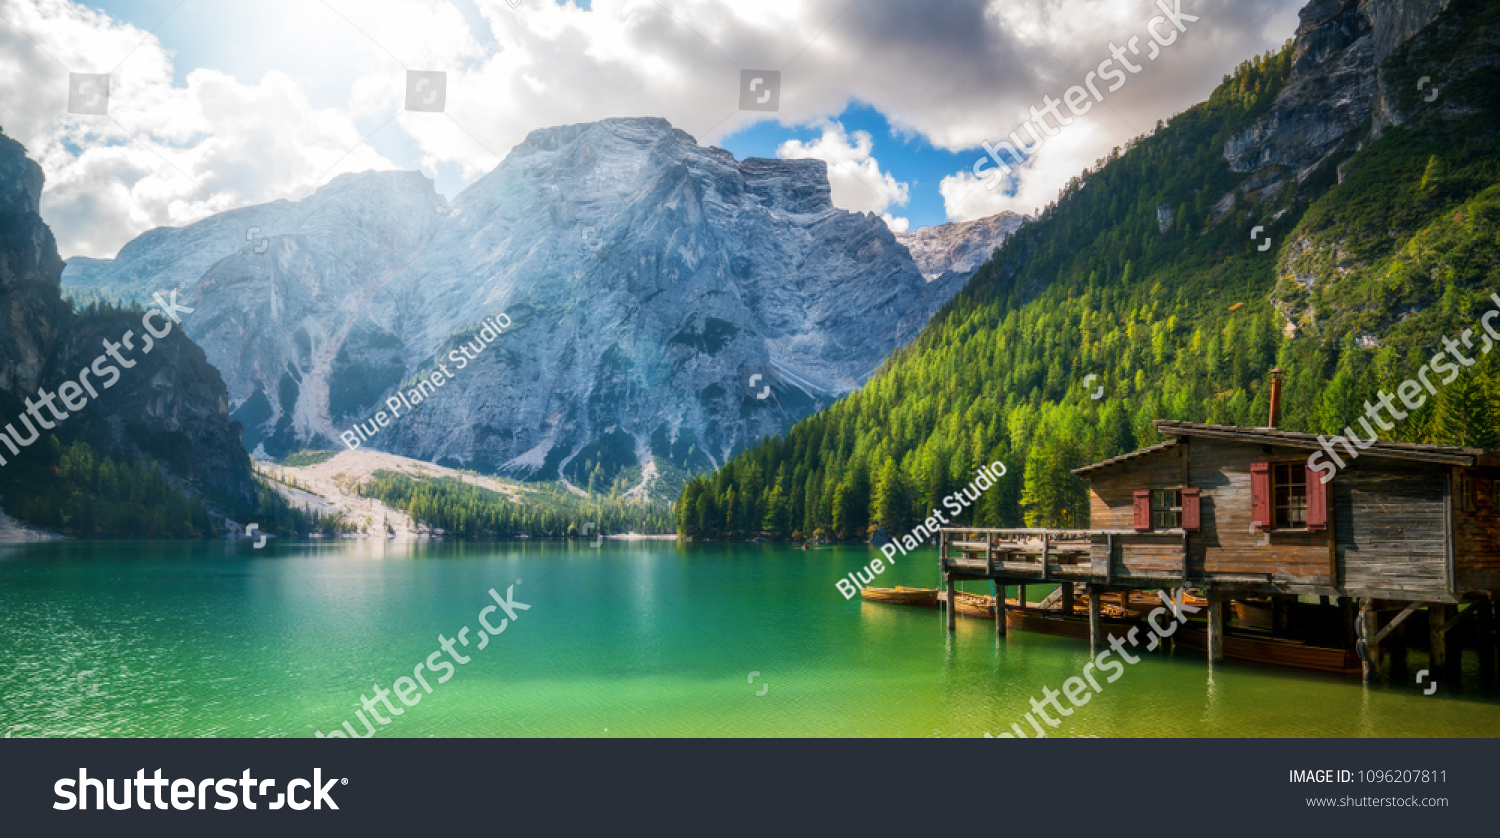 Braies Lake in Dolomites mountains forest trail in background, Sudtirol, Italy. Lake Braies is also known as Lago di Braies. The lake is surrounded by forest which are famous for scenic hiking trails. #1096207811